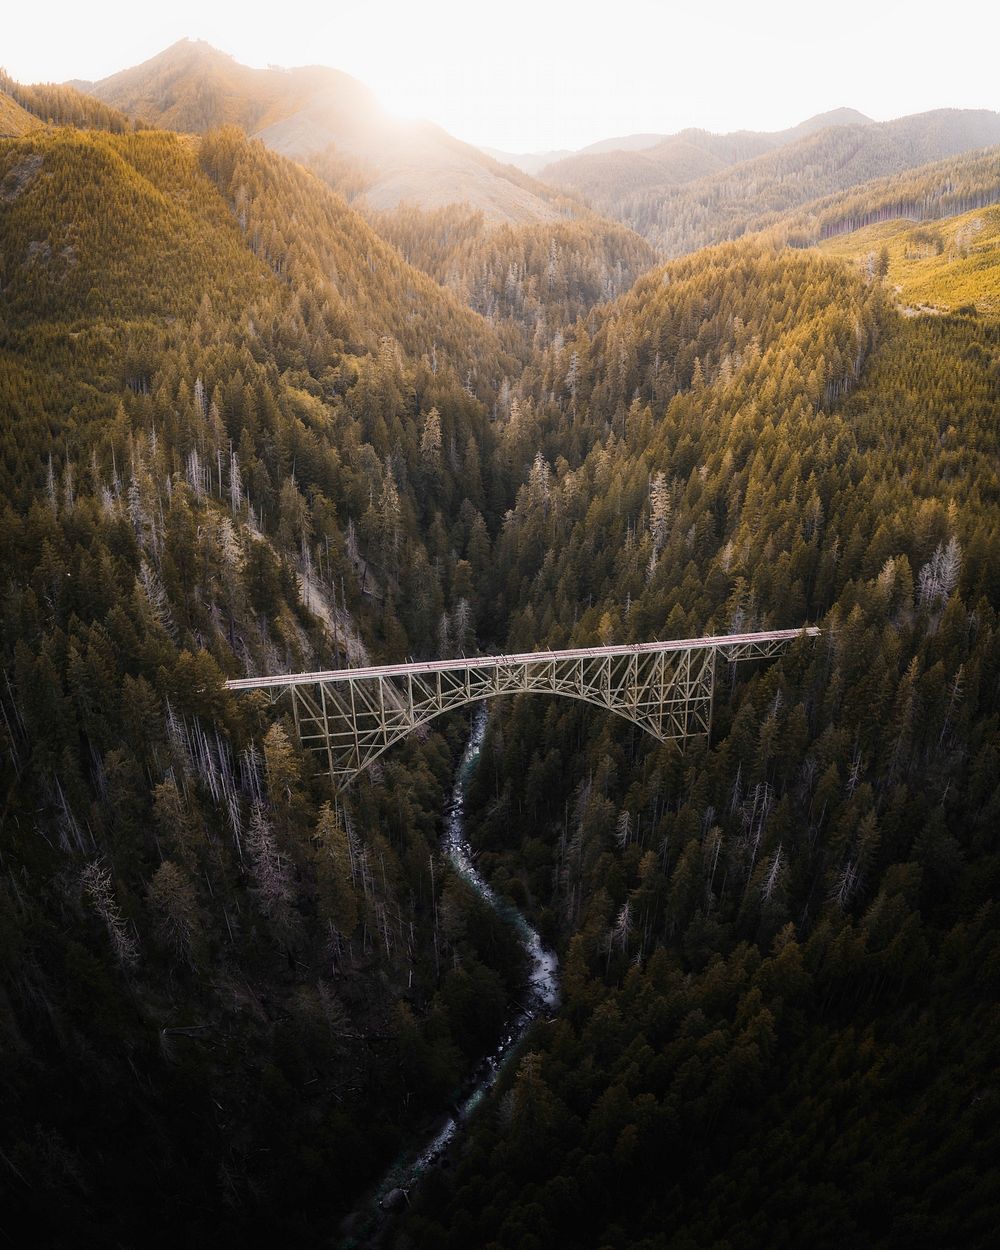 Bridge over a river in a forest